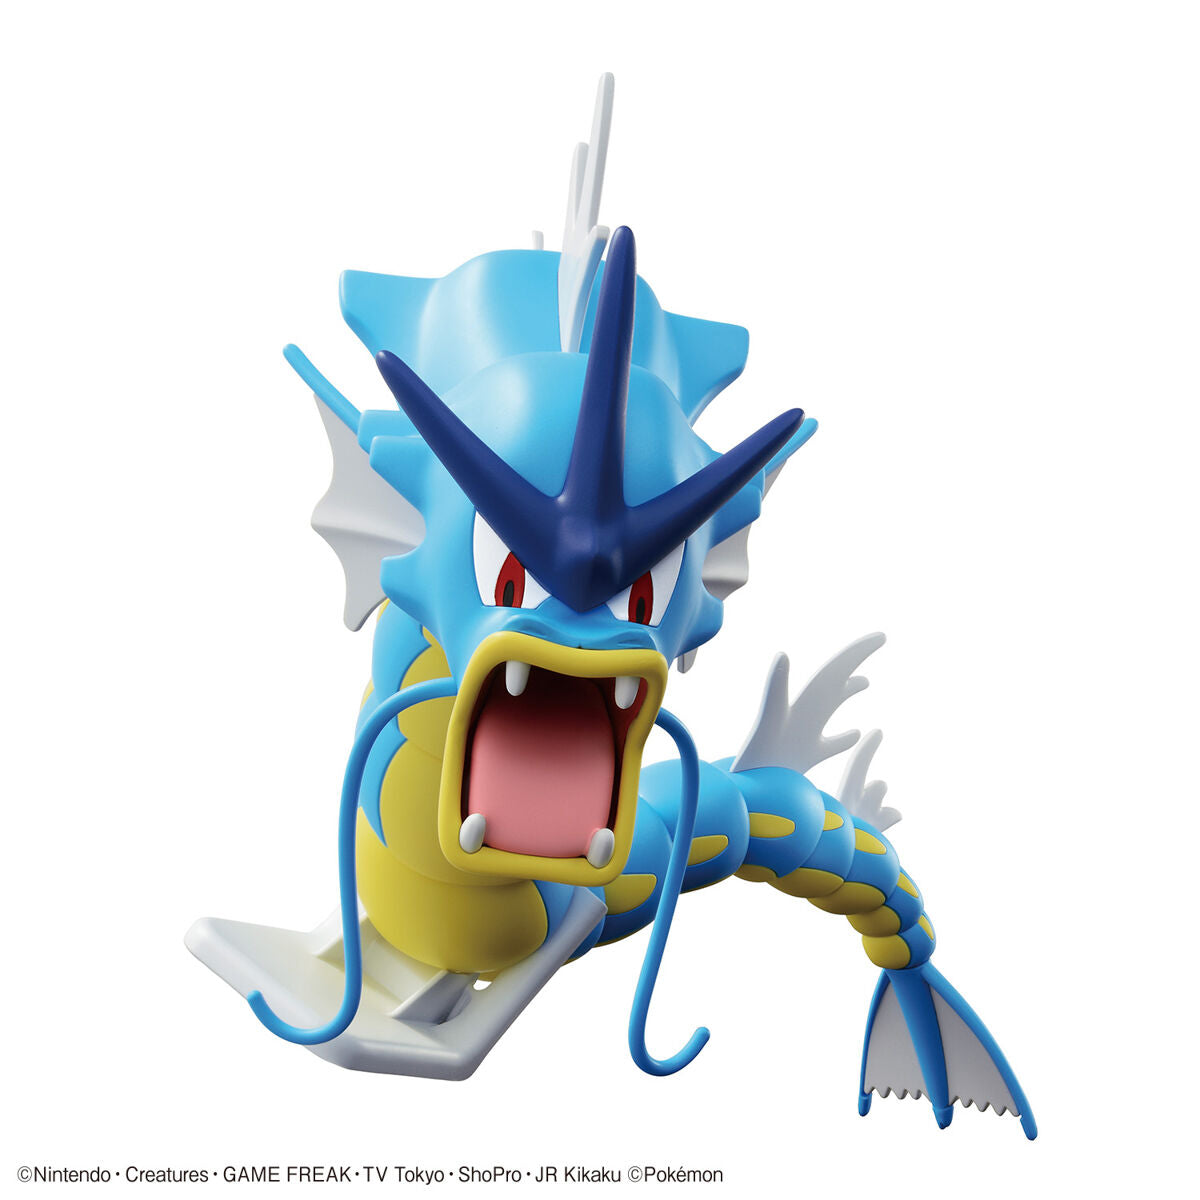 Pokémon - Gyarados - Pokémon Model Kit Collection No.52 (Bandai), Body pattern recreated using parts separation, movable parts for dynamic poses, soft parts for horns, whiskers, and tail, base included, Nippon Figures